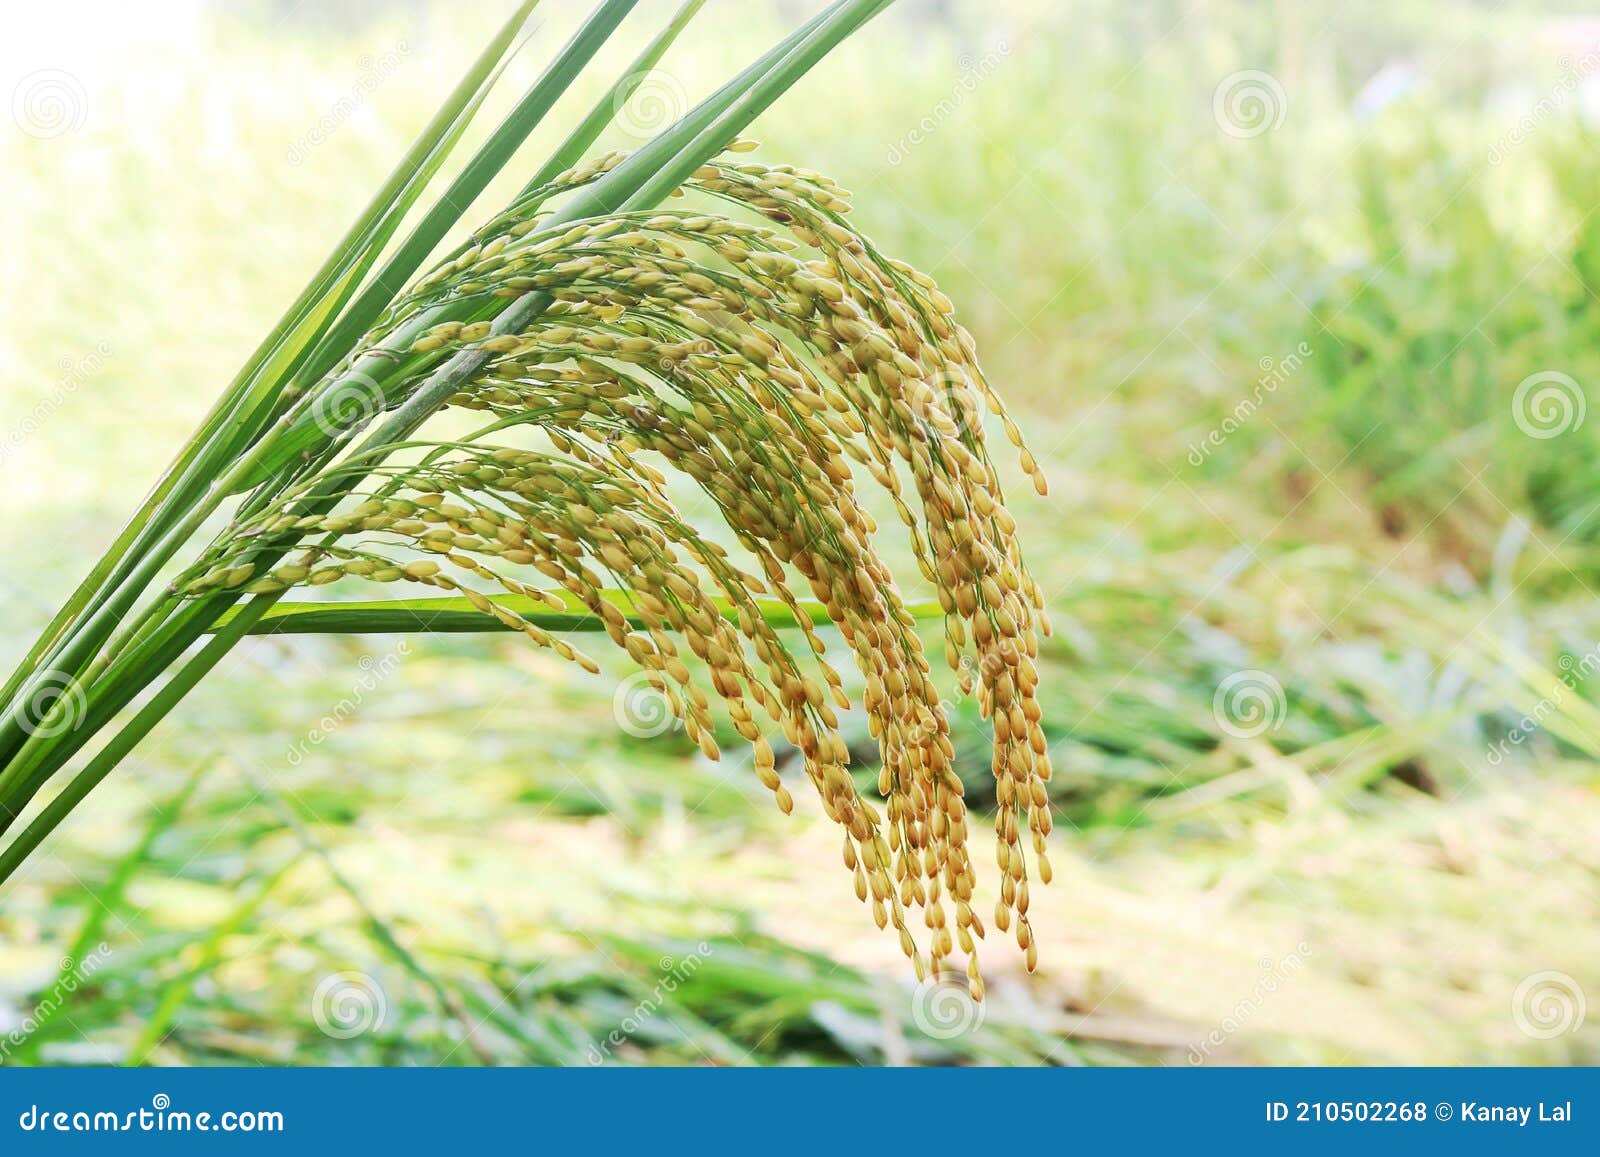 Bangladeshi Green RIce HD Quality Image Download Stock Photo - Image of  background, flowers: 210502268